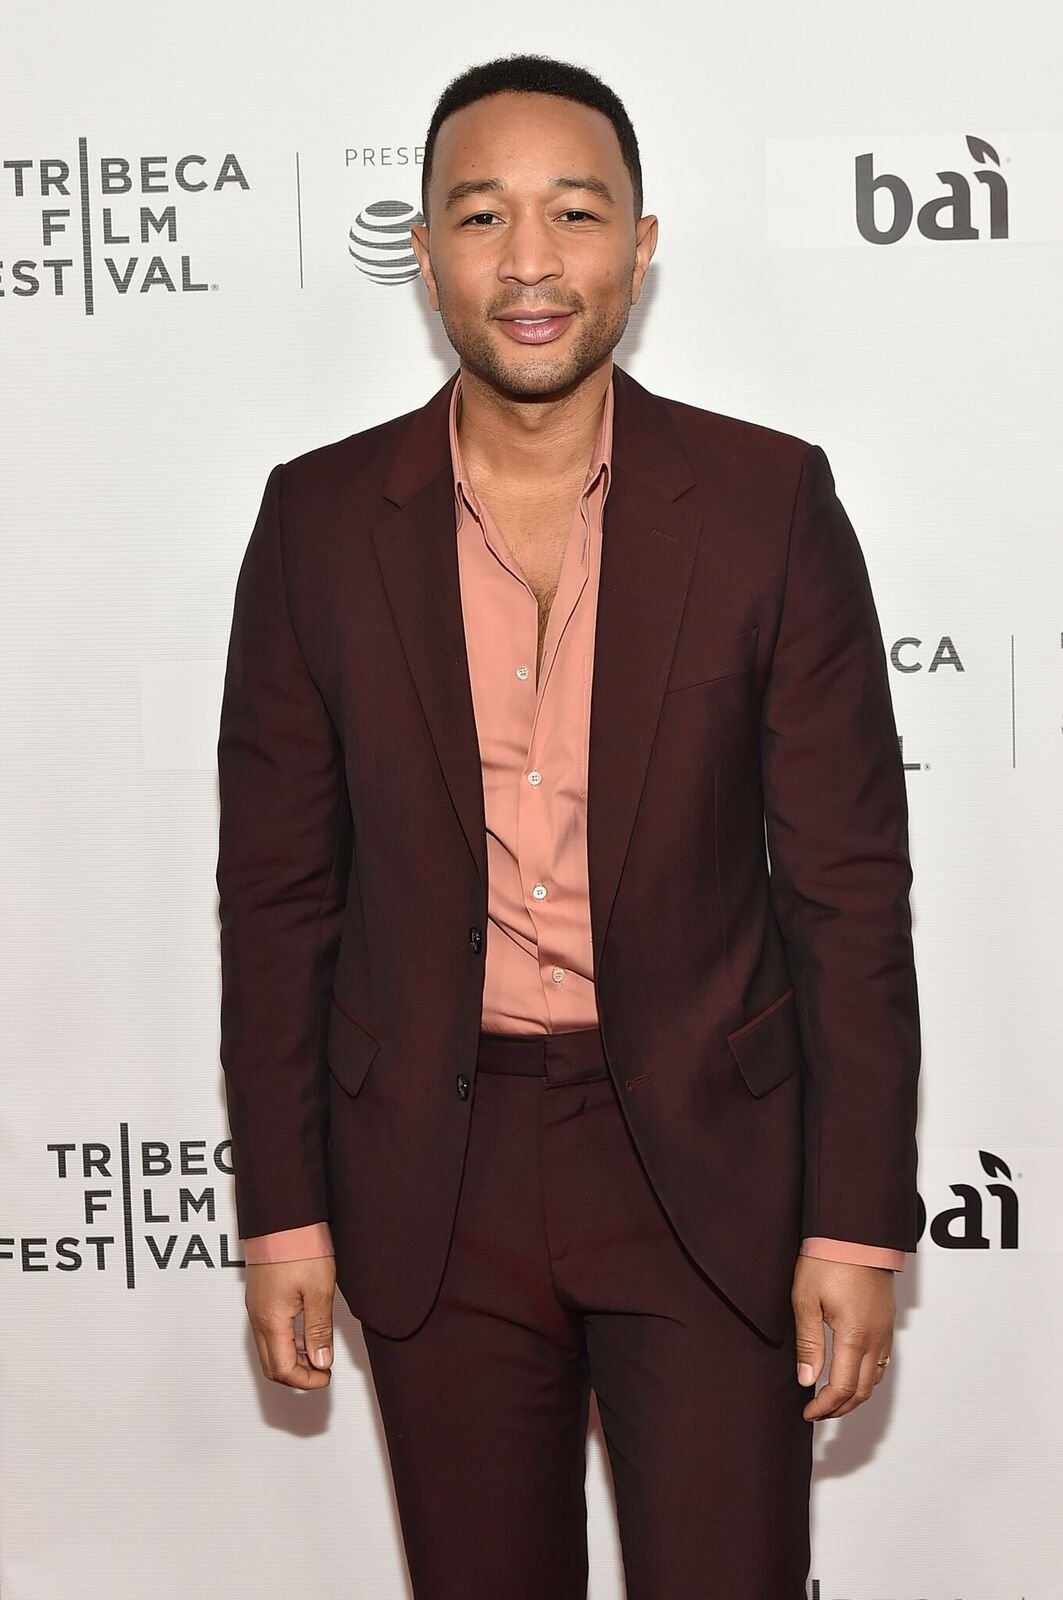  John Legend attends a screening of "United Skates" during the 2018 Tribeca Film Festival at Cinepolis Chelsea on April 19, 2018 in New York City | Photo: Getty Images